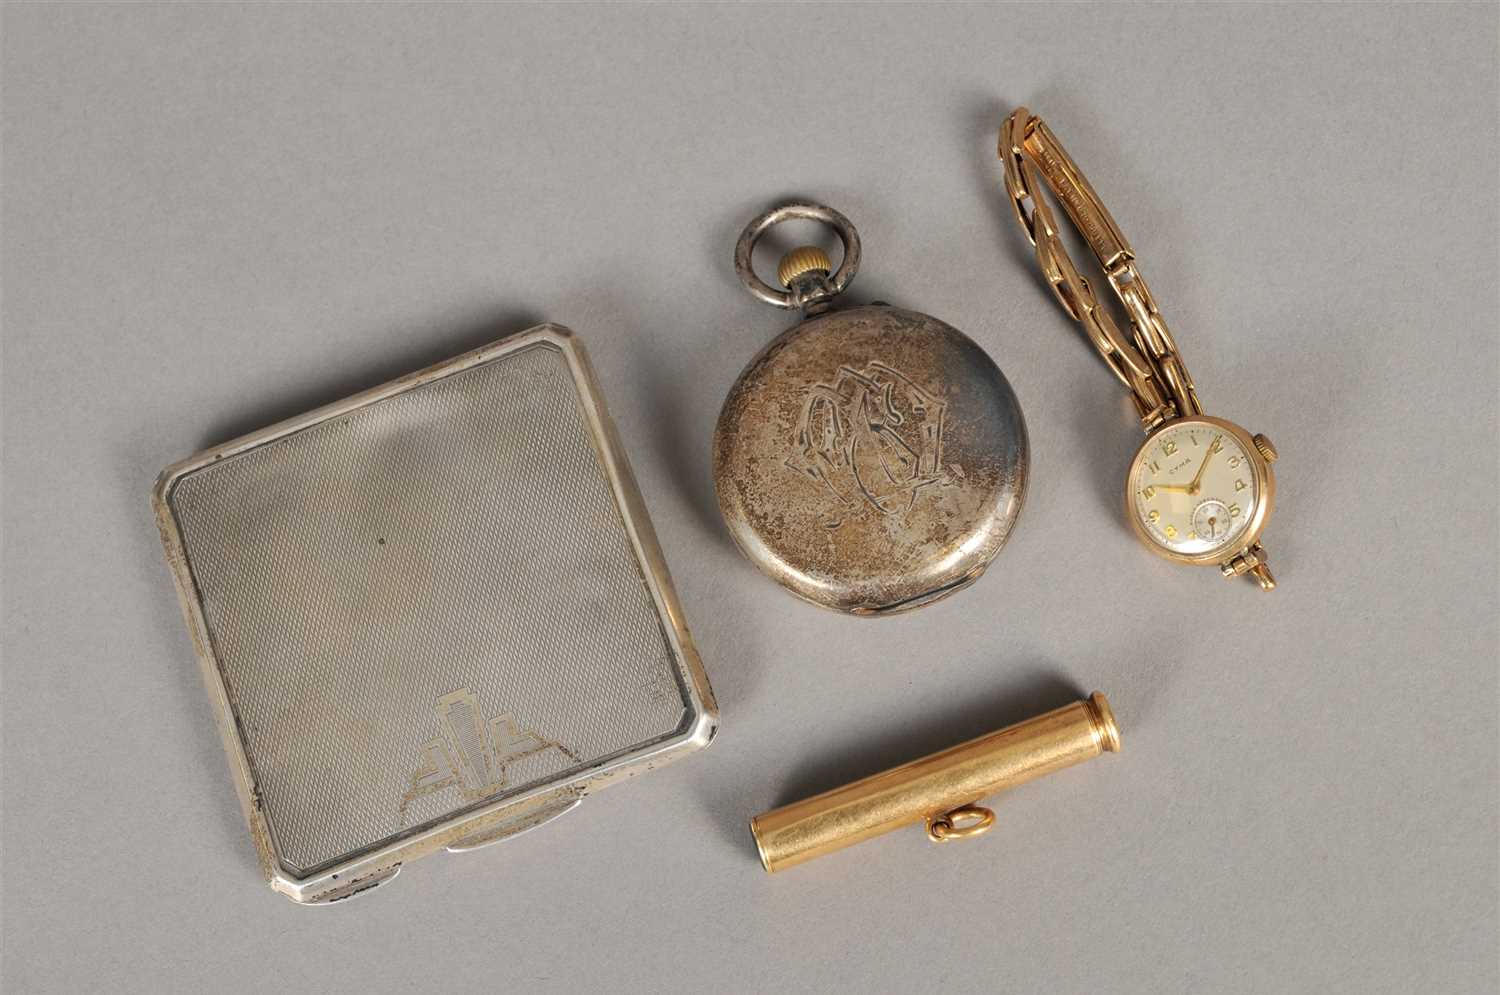 Lot 73 - An Art Deco silver compact, a 9ct gold wristwatch, a pencil and a pocket watch